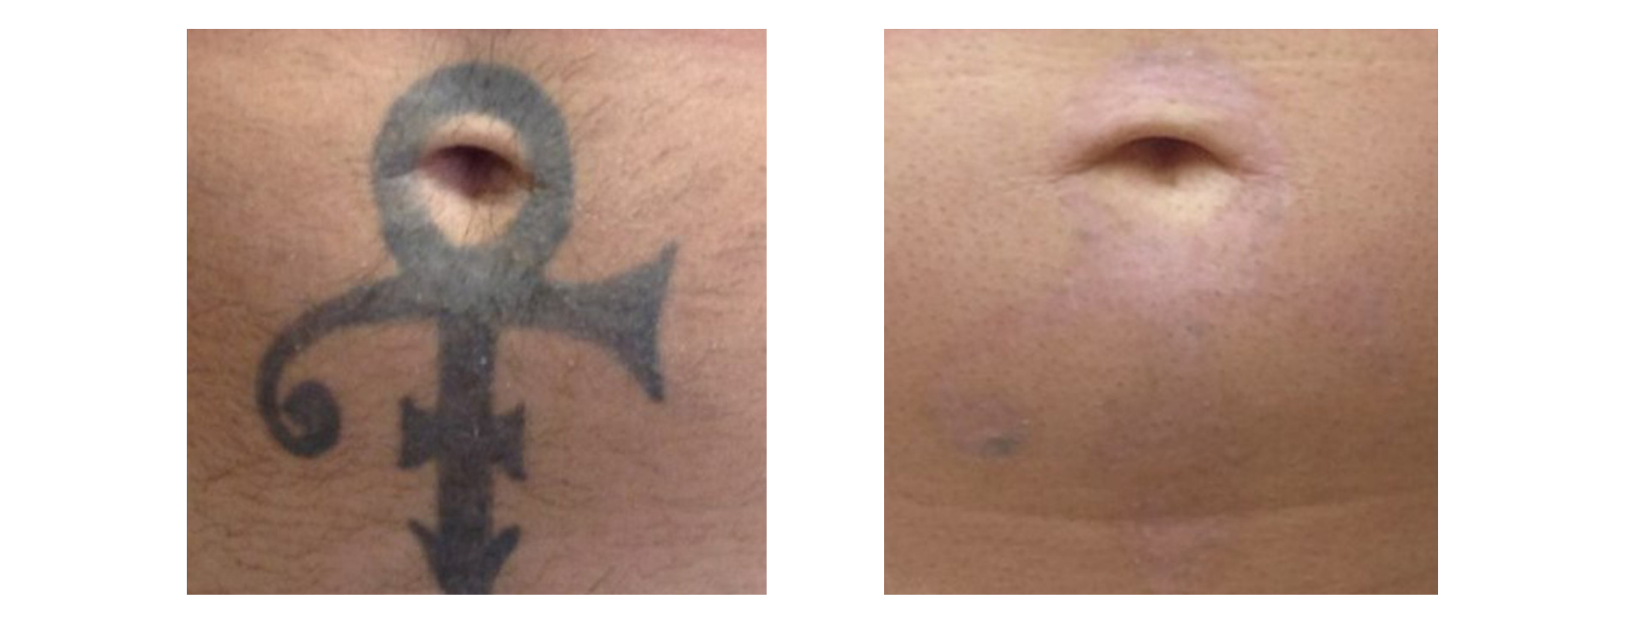 Tattoo Removal Belly Button Black Tone